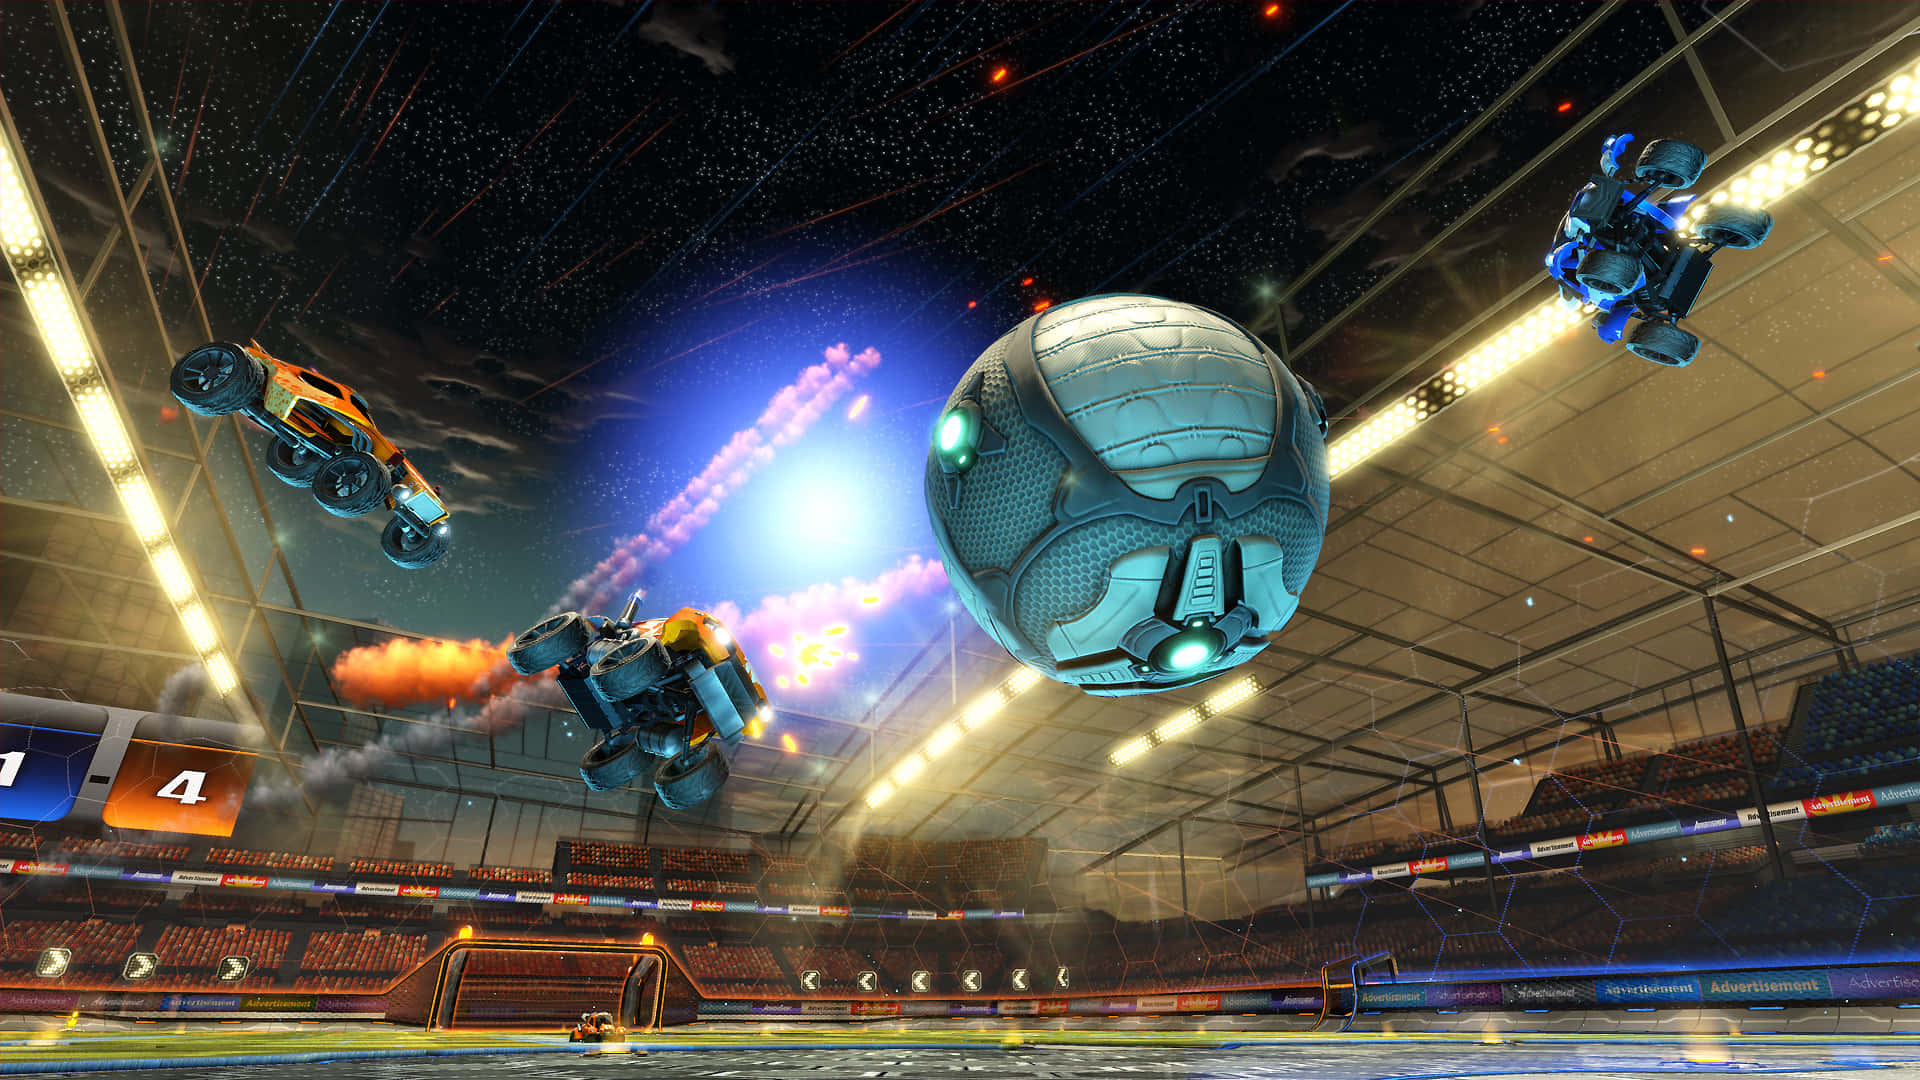 Explosive Gameplay on the Rocket League Field Wallpaper